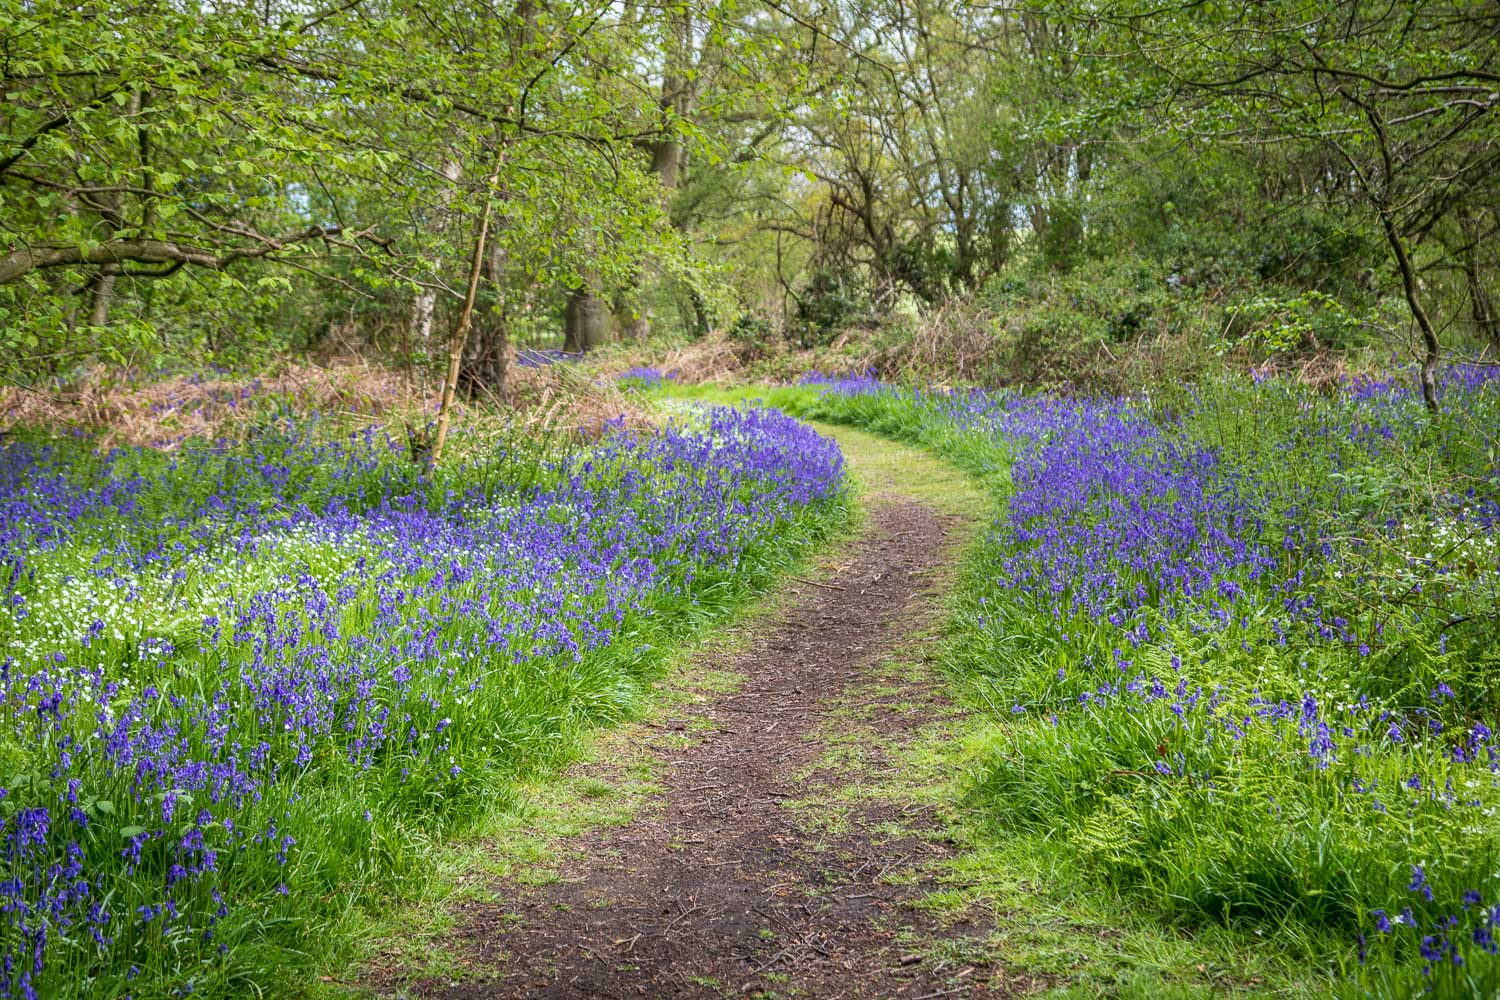 North Cliffe Wood, bluebell